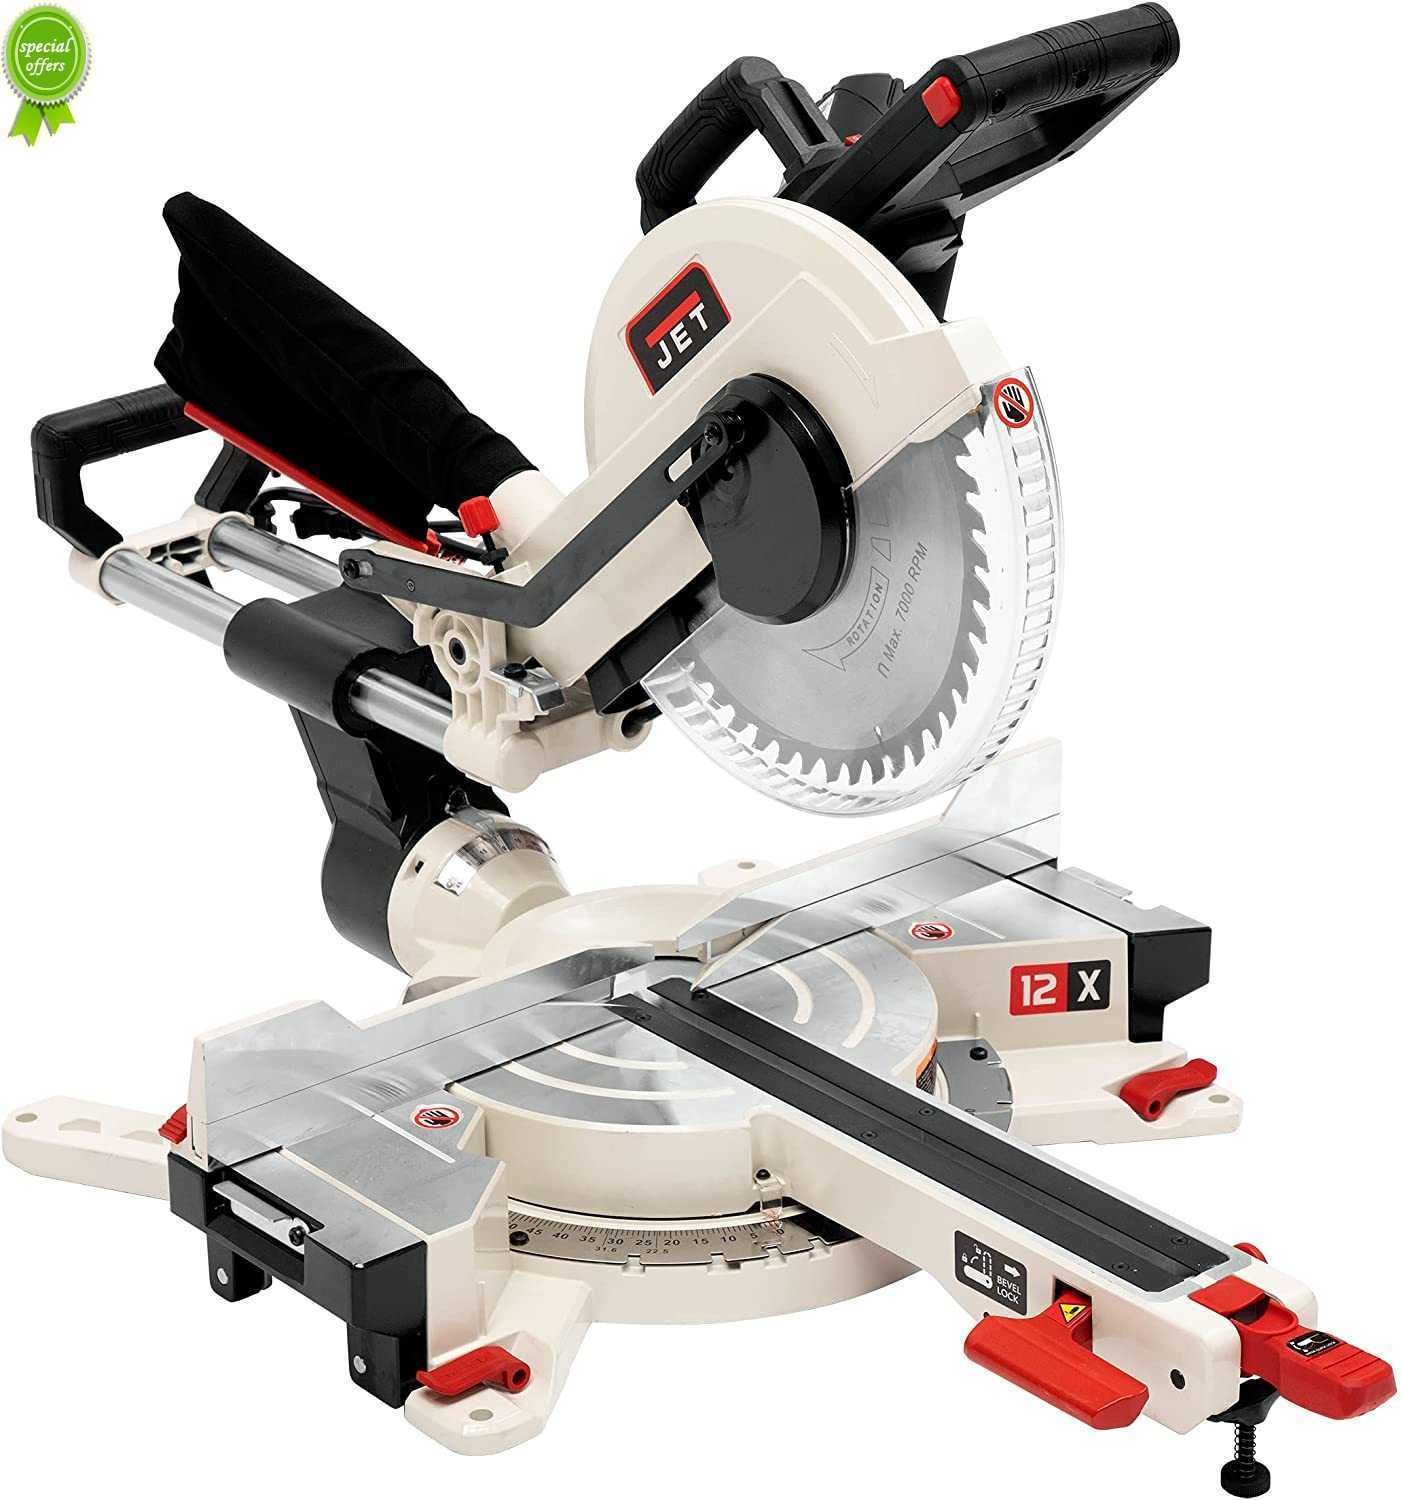 

New New Low price JET JMS-12X 12-Inch Sliding Dual-Bevel Compound Miter Saw (707212) Metal wall plate